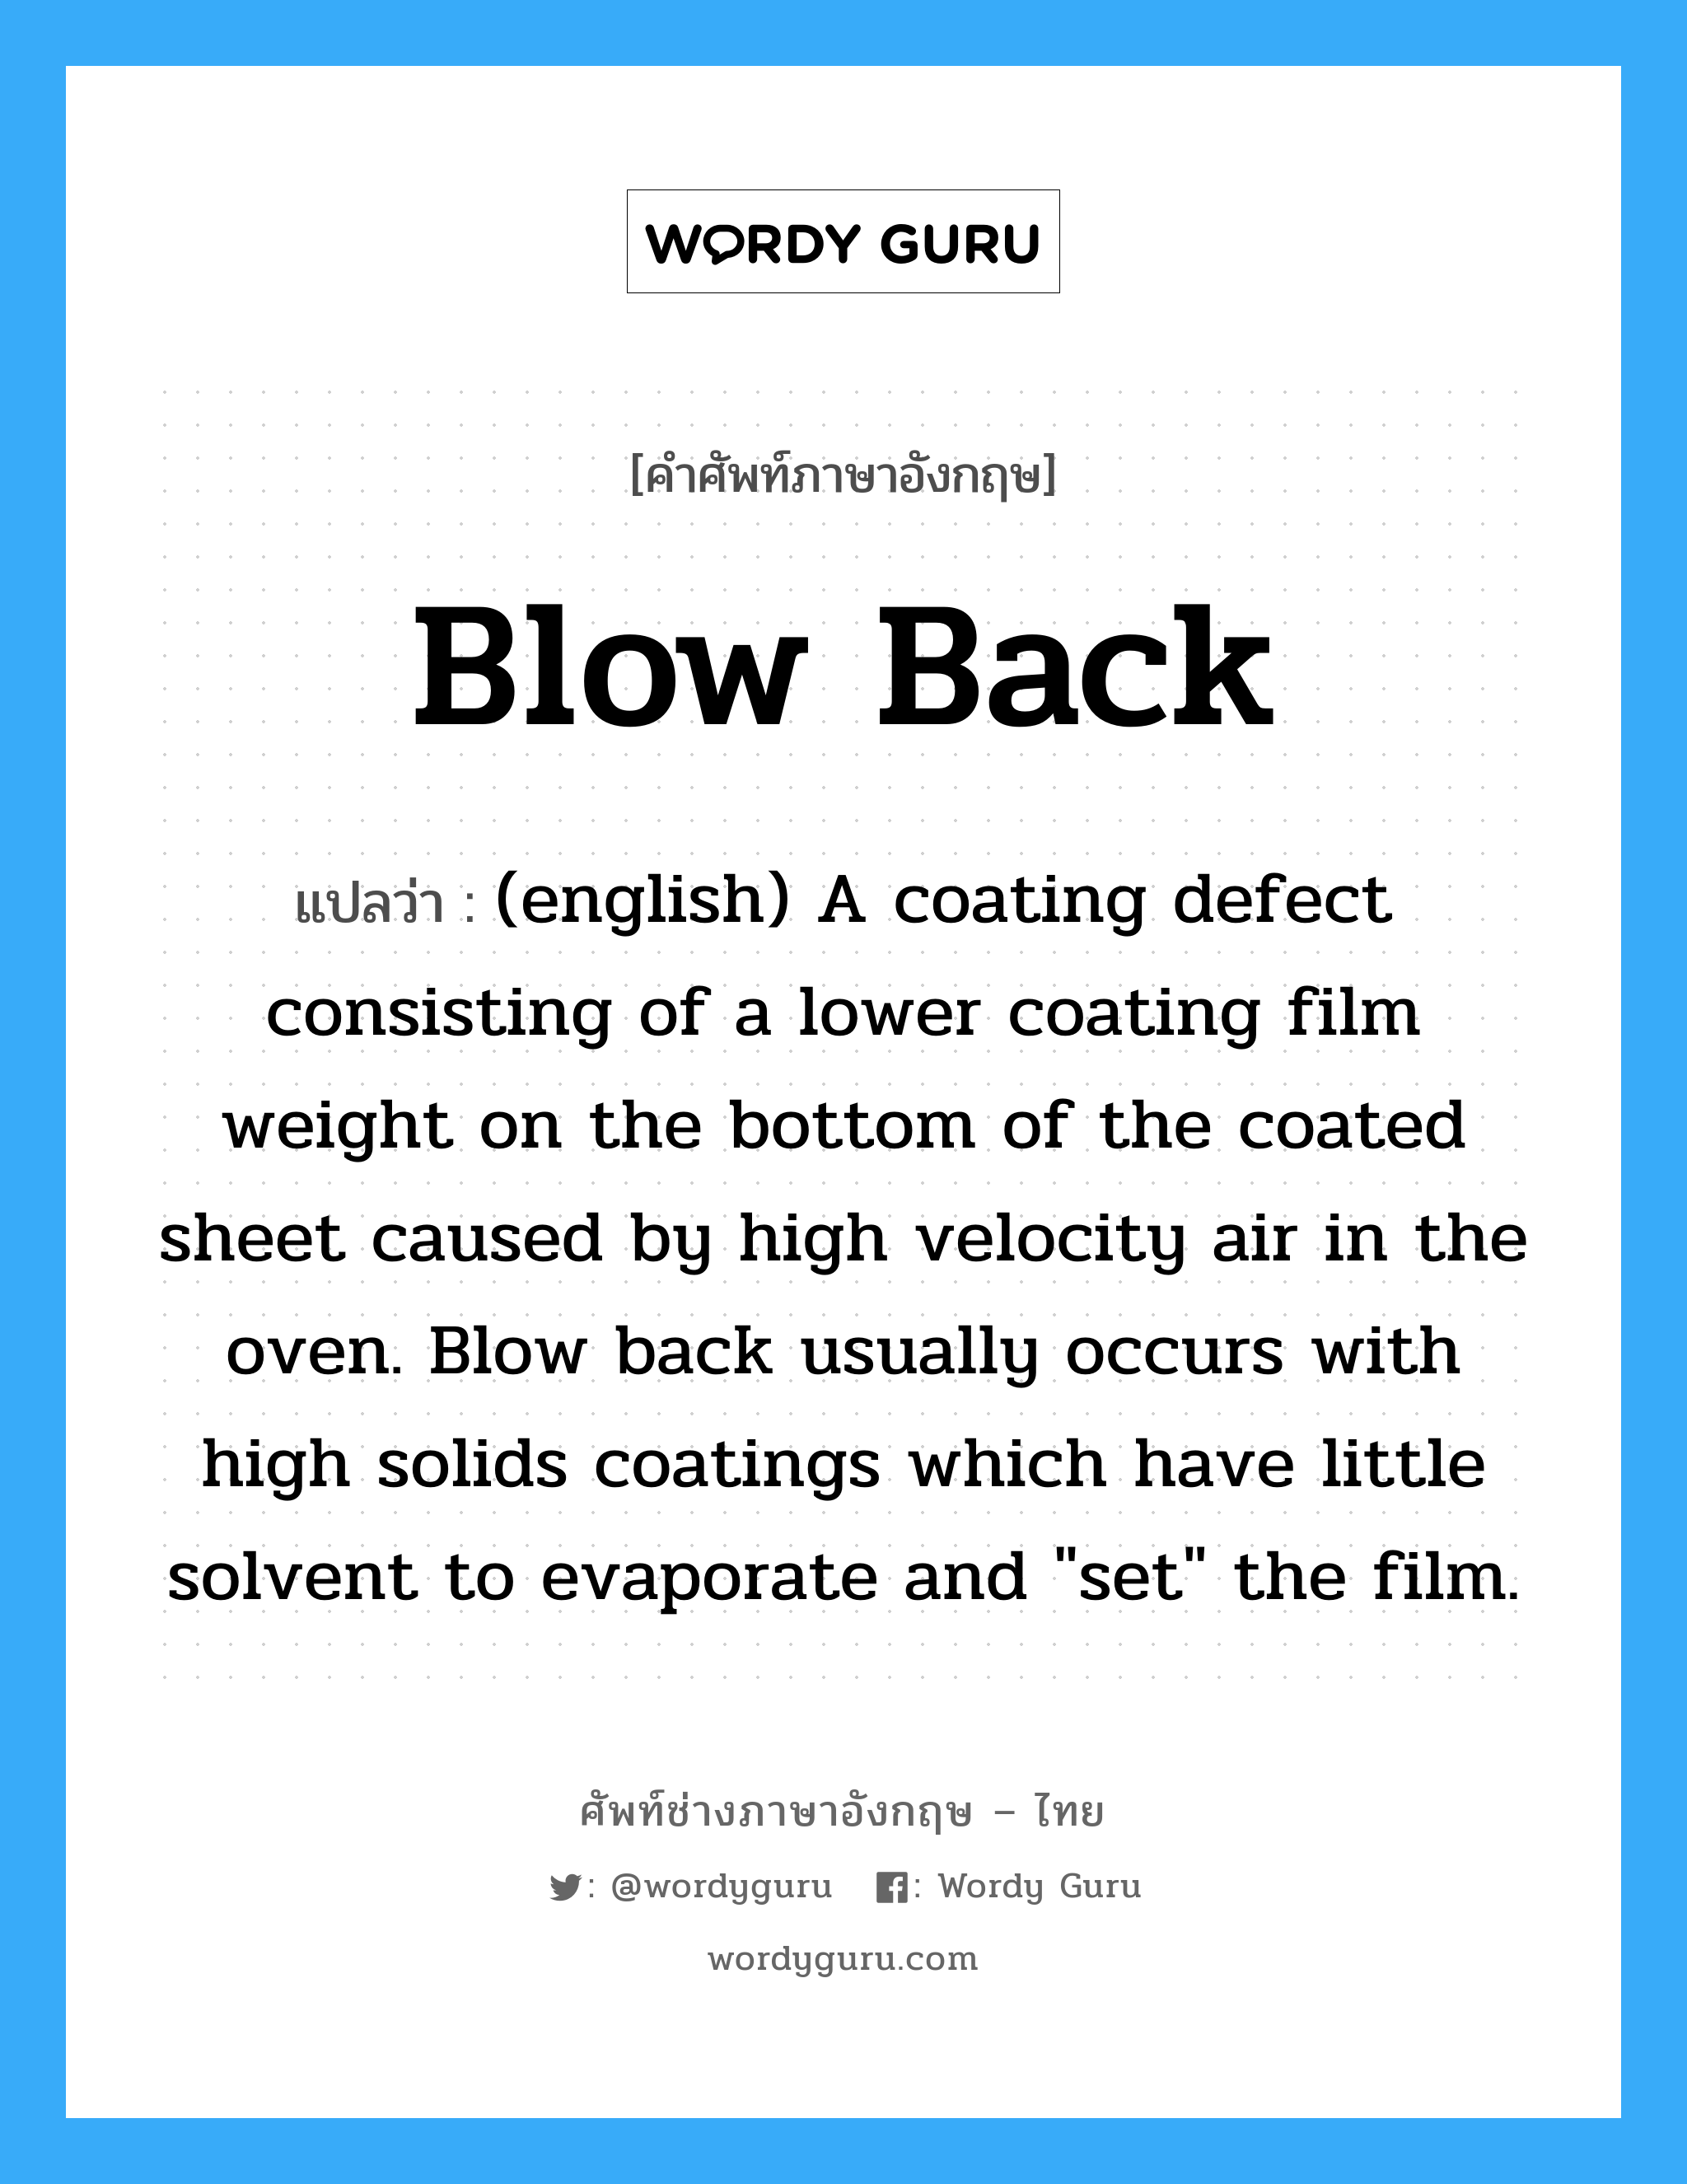 Blow Back แปลว่า?, คำศัพท์ช่างภาษาอังกฤษ - ไทย Blow Back คำศัพท์ภาษาอังกฤษ Blow Back แปลว่า (english) A coating defect consisting of a lower coating film weight on the bottom of the coated sheet caused by high velocity air in the oven. Blow back usually occurs with high solids coatings which have little solvent to evaporate and "set" the film.